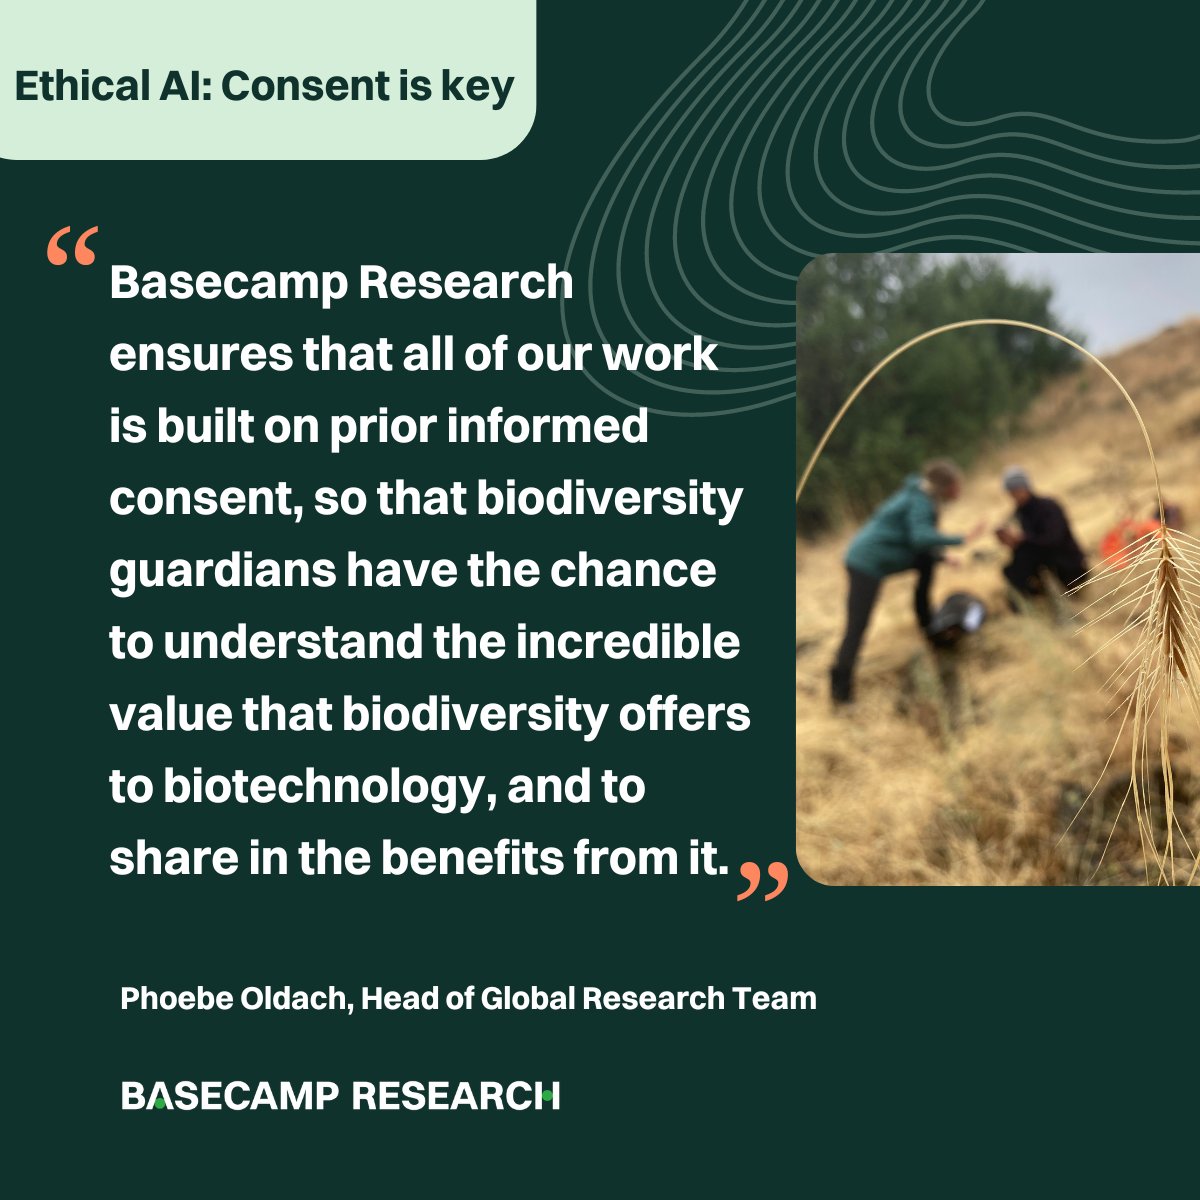 Consent is key to great AI. At @Basecamp_Res, we've shown you can create cutting-edge AI while ethically sourcing 100% of the data. We built the largest biodiversity database and can trace each data point not only to the land owner’s consent but also a benefits-sharing agreement